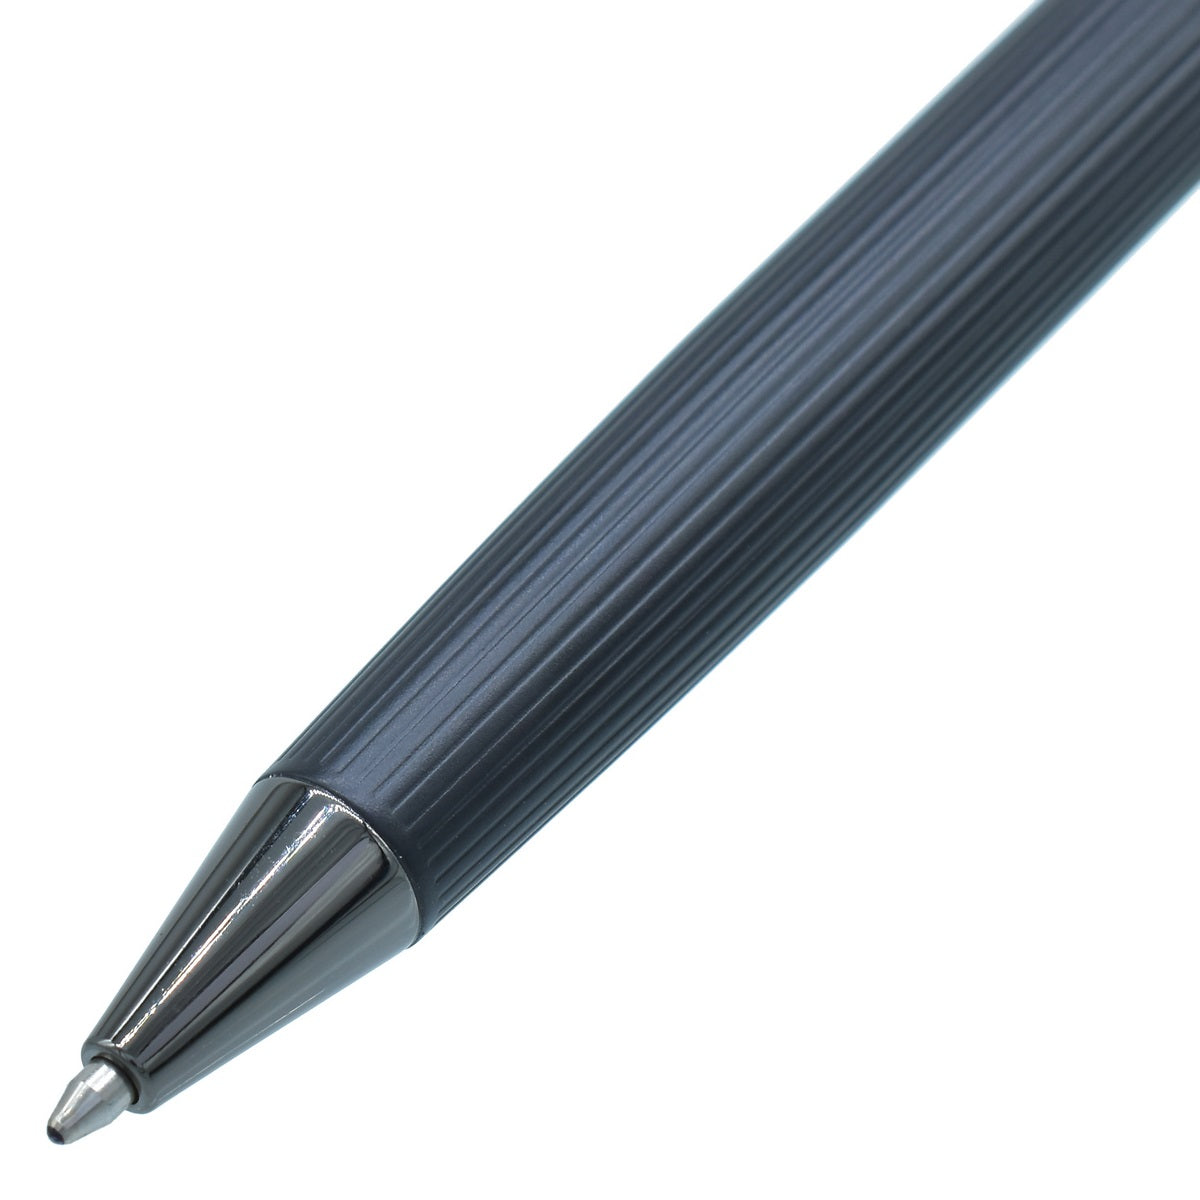 Black & Lavender Color Ball Pen - For Office, College, Personal Use, Corporate Gifting, Return Gift - JA3006BPPK